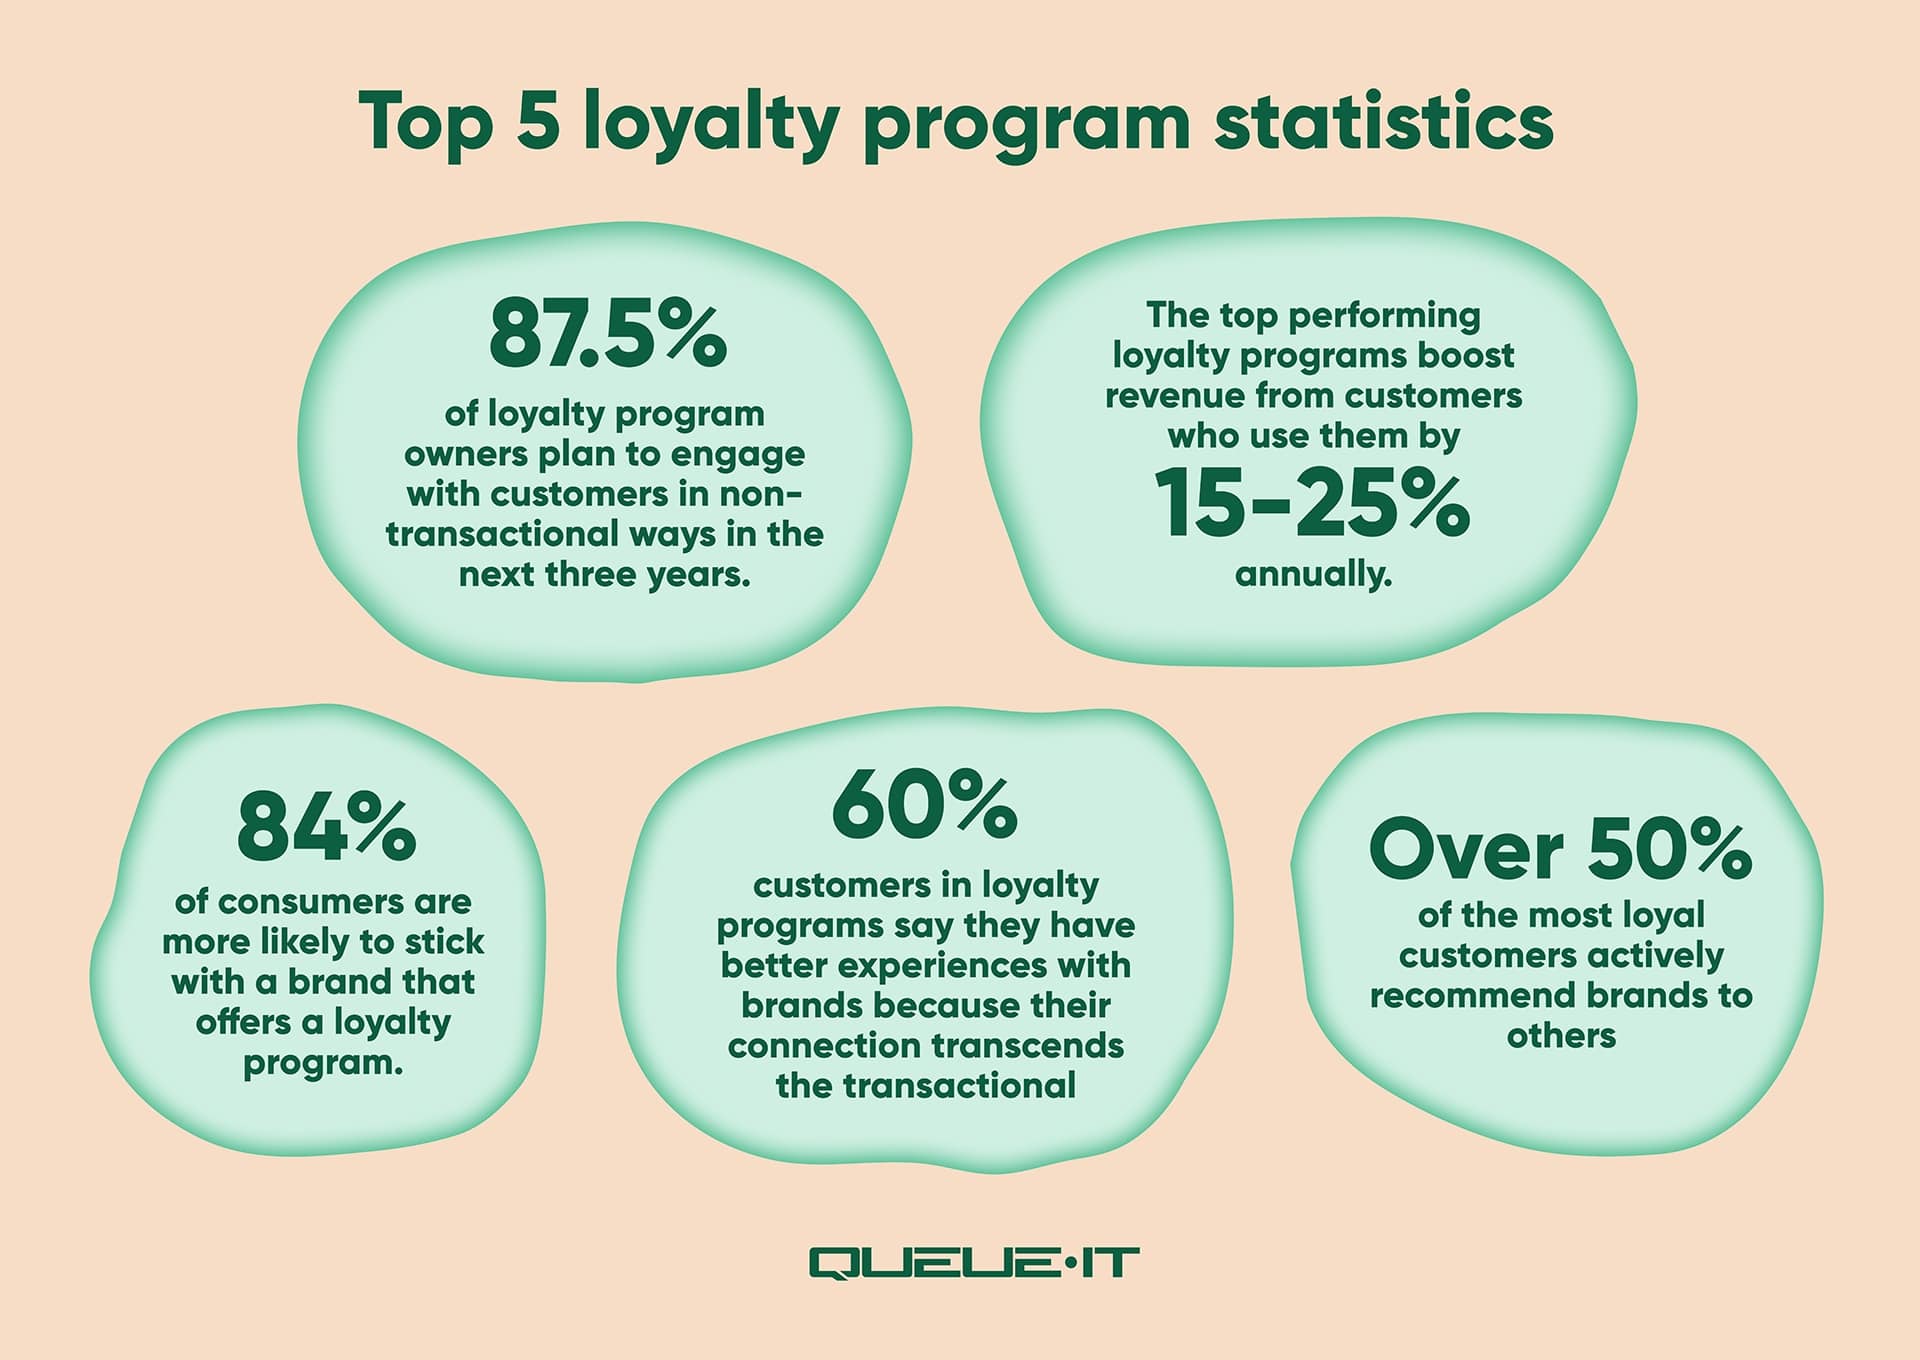 A selection of the top 5 Loyalty program statistics 